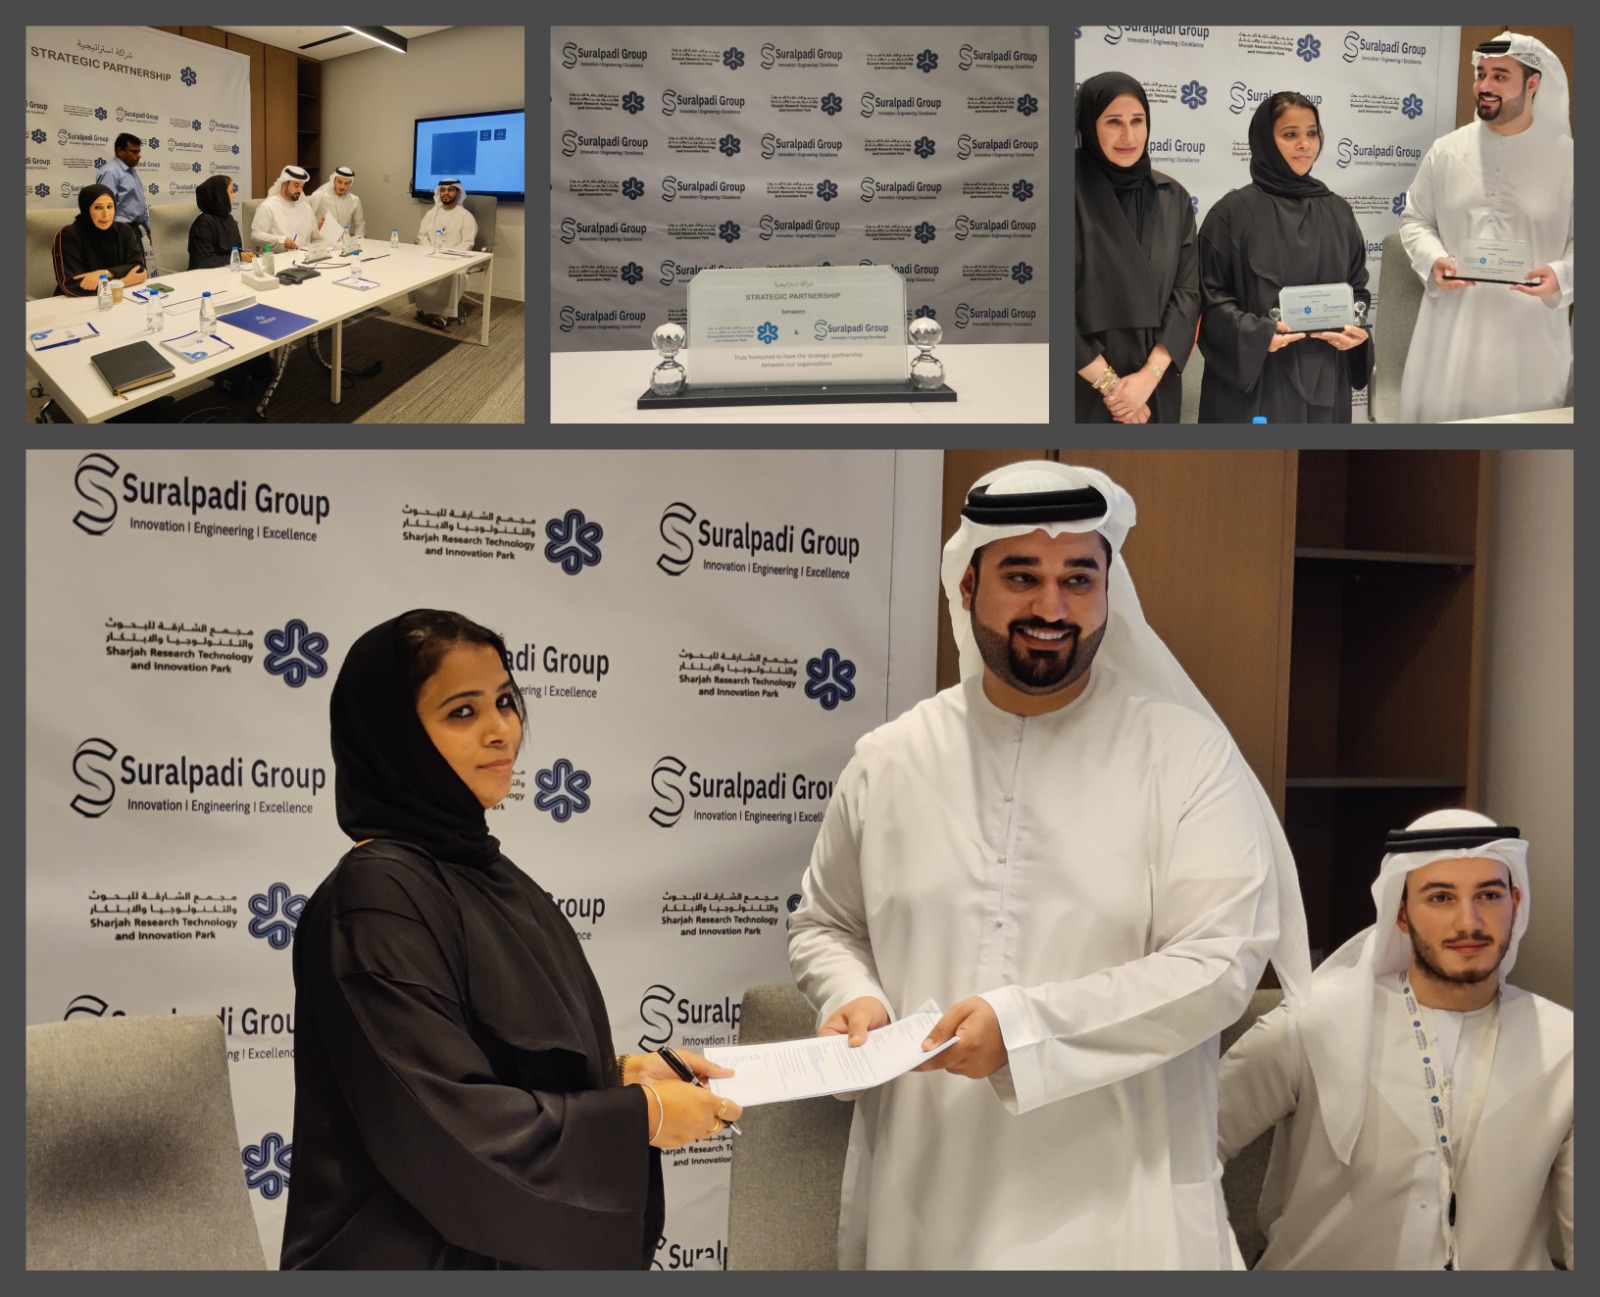 Suralpadi Group and Sharjah Research Technology and Innovation Park (SRTIP) announced a Strategic Partnership